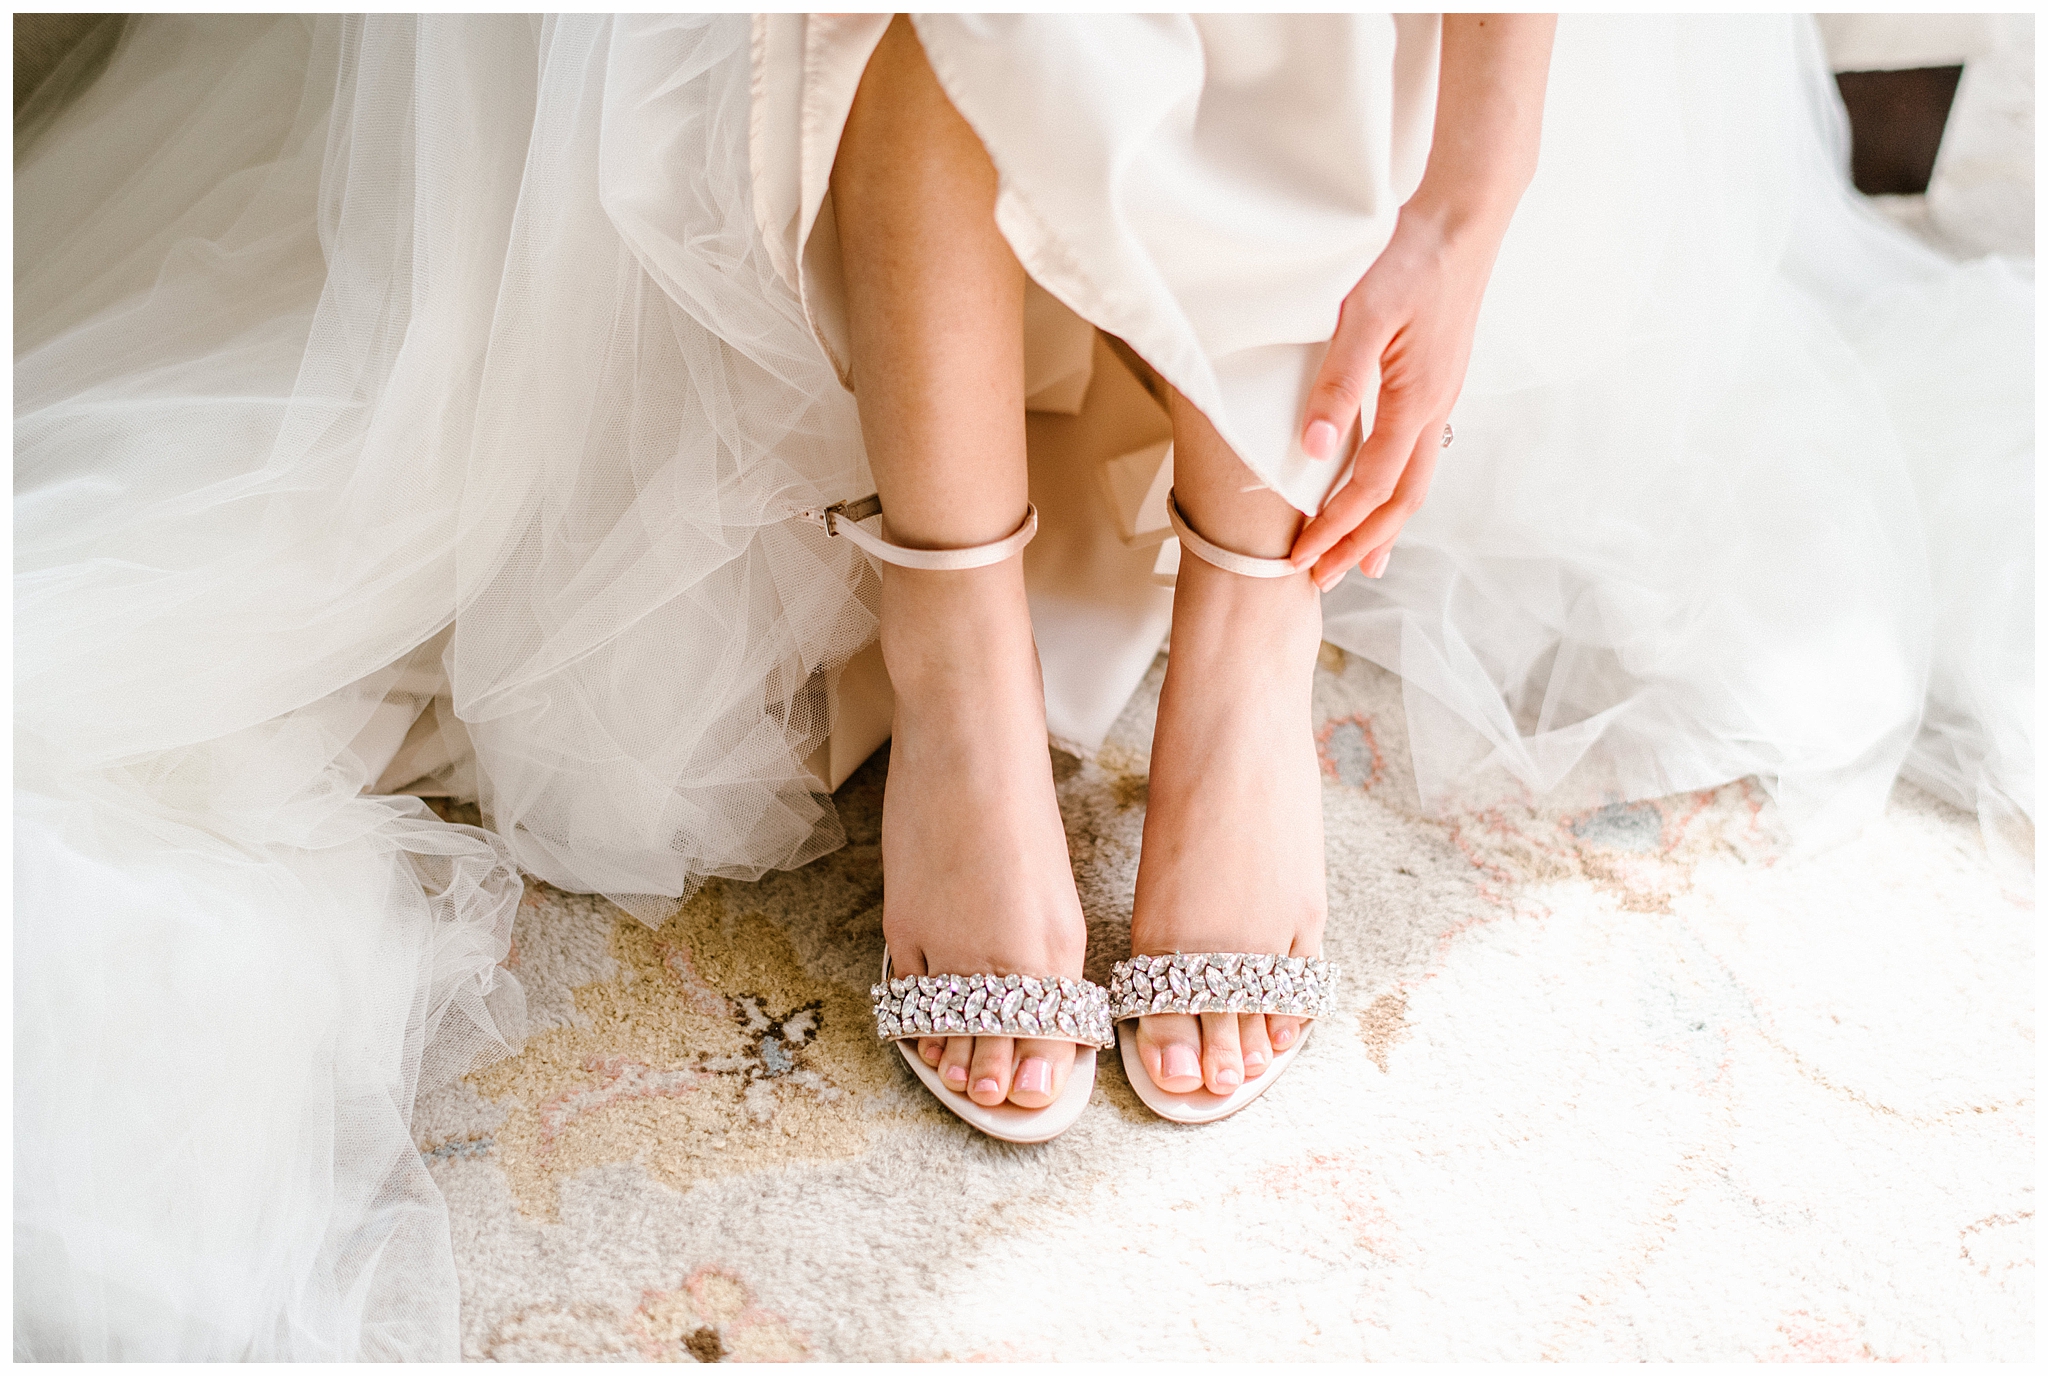 Crystal Bridal Shoes and Tulle BHLDN Wedding Dress